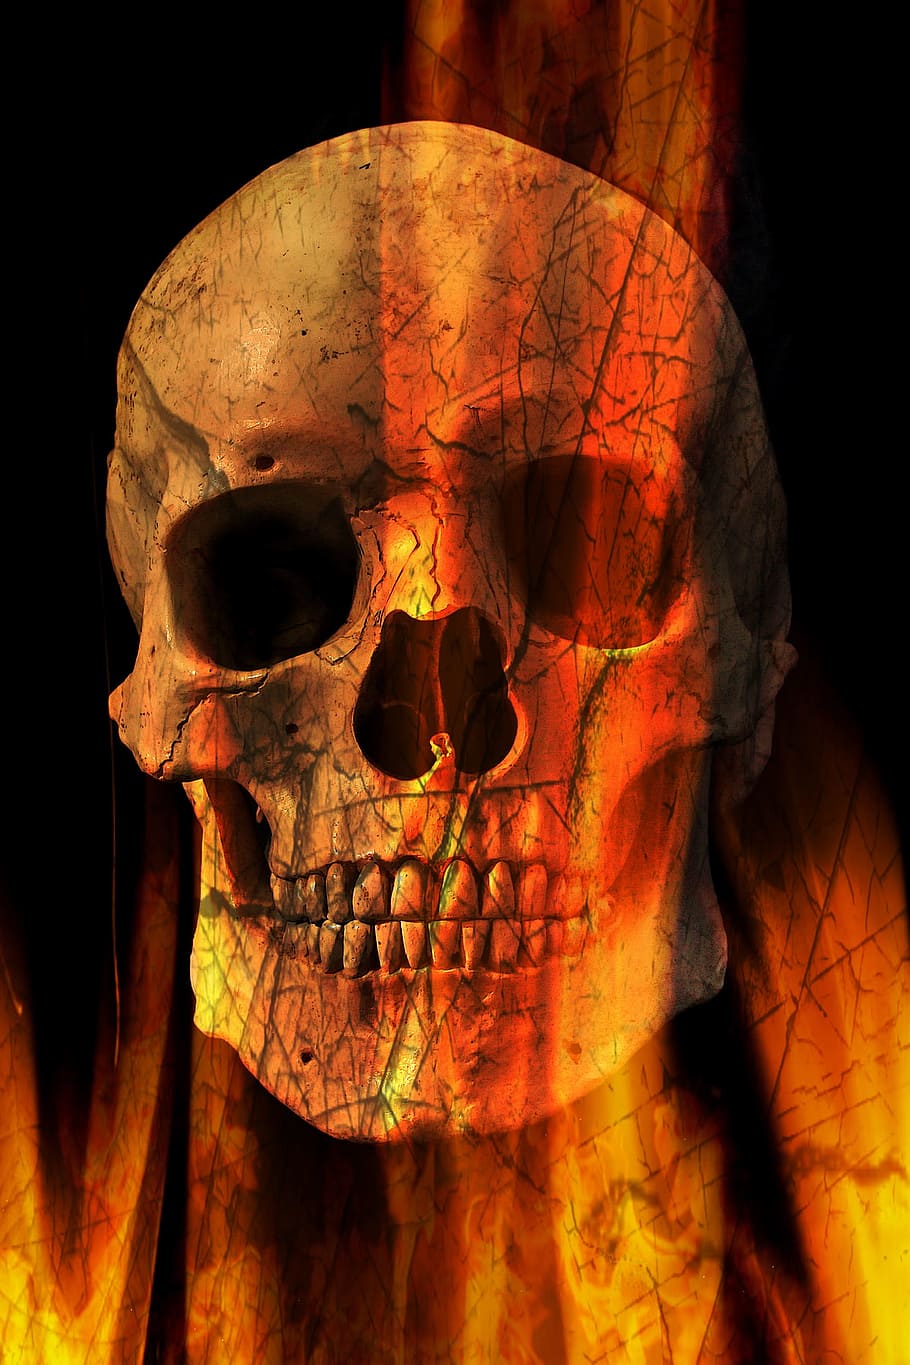 Download Skull wallpapers for mobile phone free Skull HD pictures